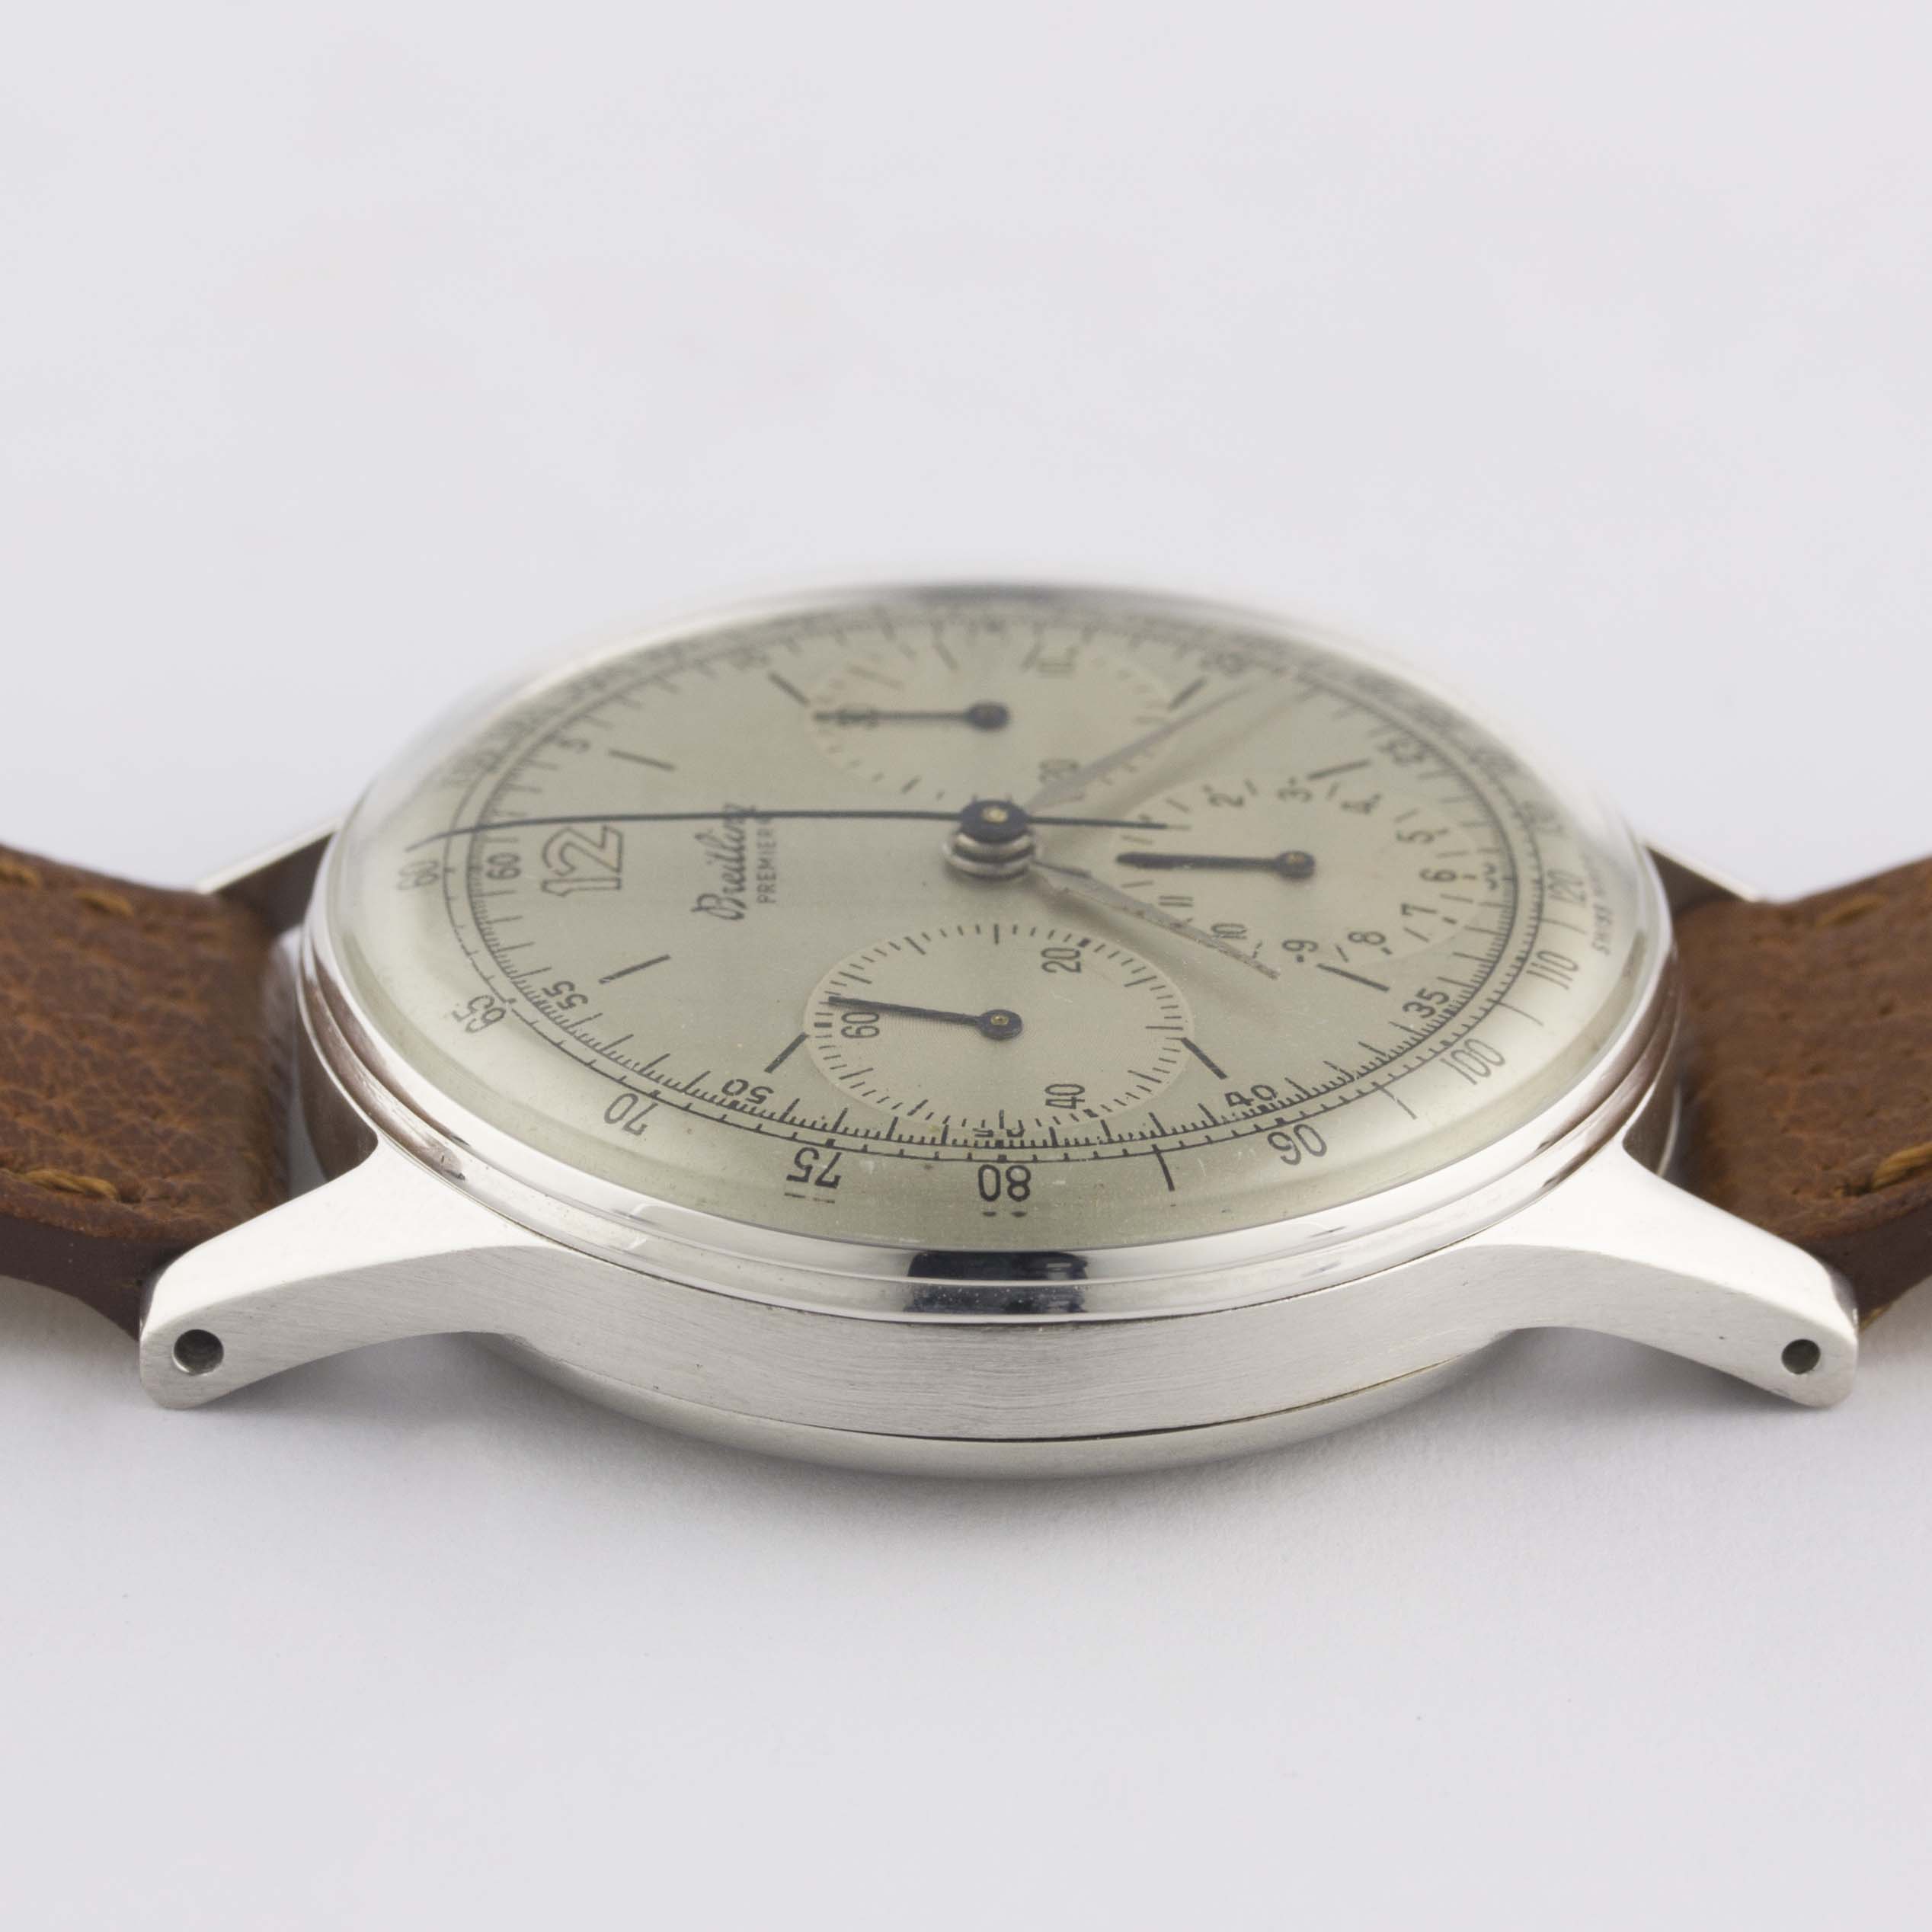 A RARE GENTLEMAN'S LARGE SIZE BREITLING PREMIER CHRONOGRAPH WRIST WATCH CIRCA 1946, REF. 734 - Image 9 of 9